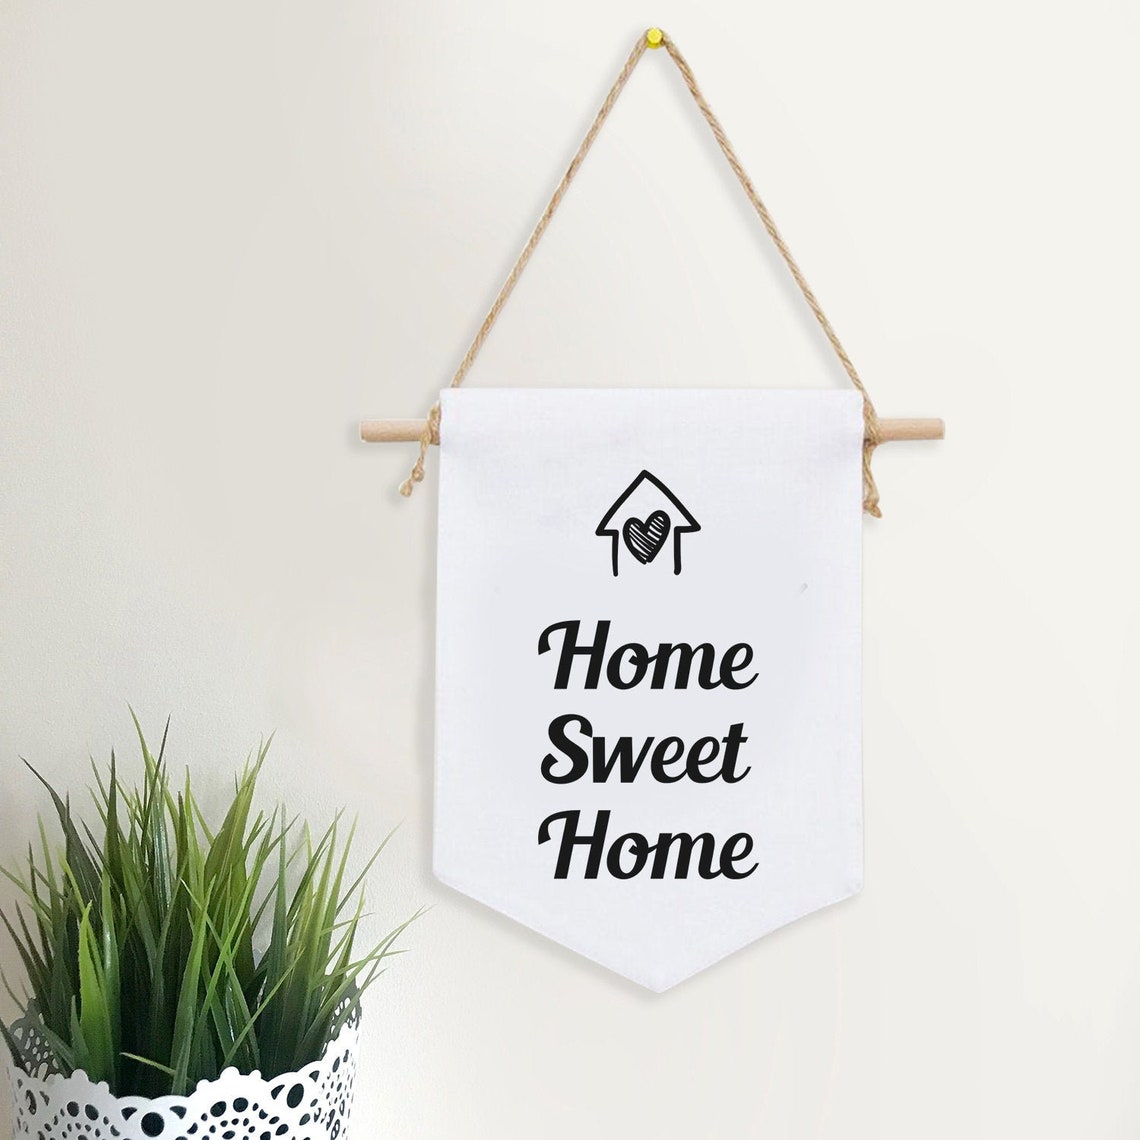 Home Sweet Home Banner Flag Home Sweet Home Wall Flag Quote | Etsy